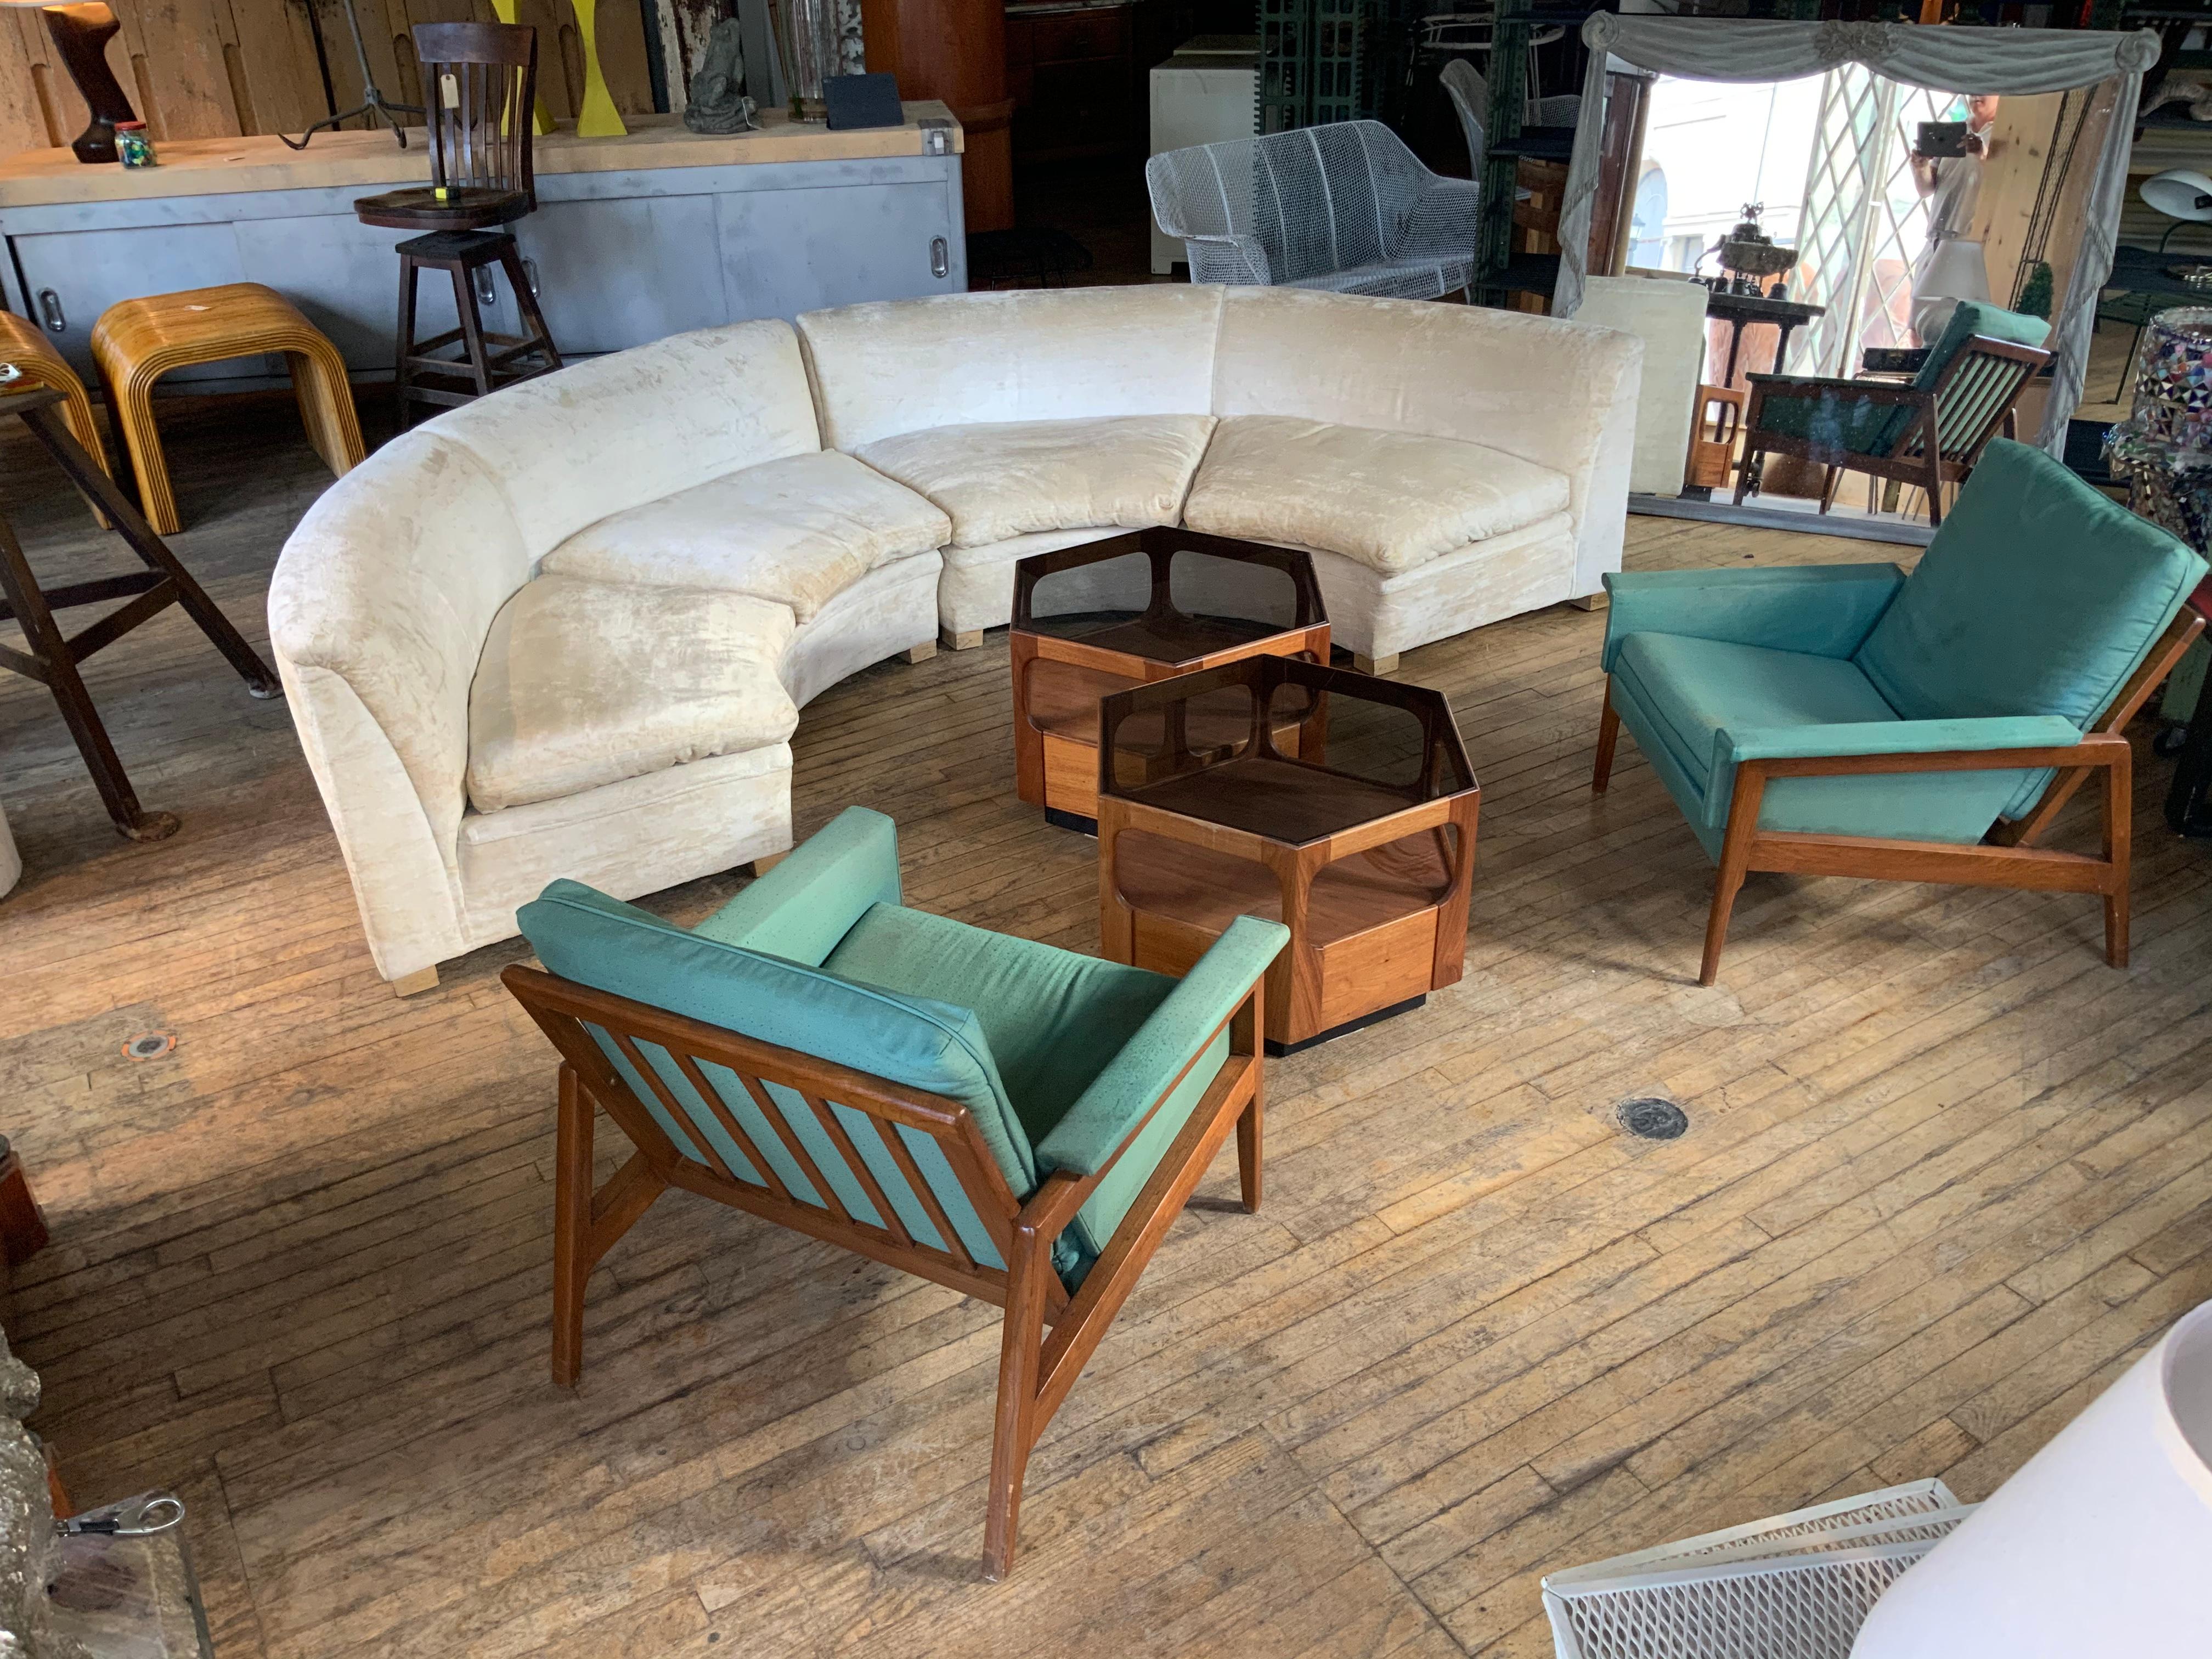 An outstanding large curved semi-circular sectional sofa designed by Milo Baughman, circa 1970. Fantastic shape and proportions make this a very comfortable sofa. Can be placed with both sections together making a complete semi-circle, or with the